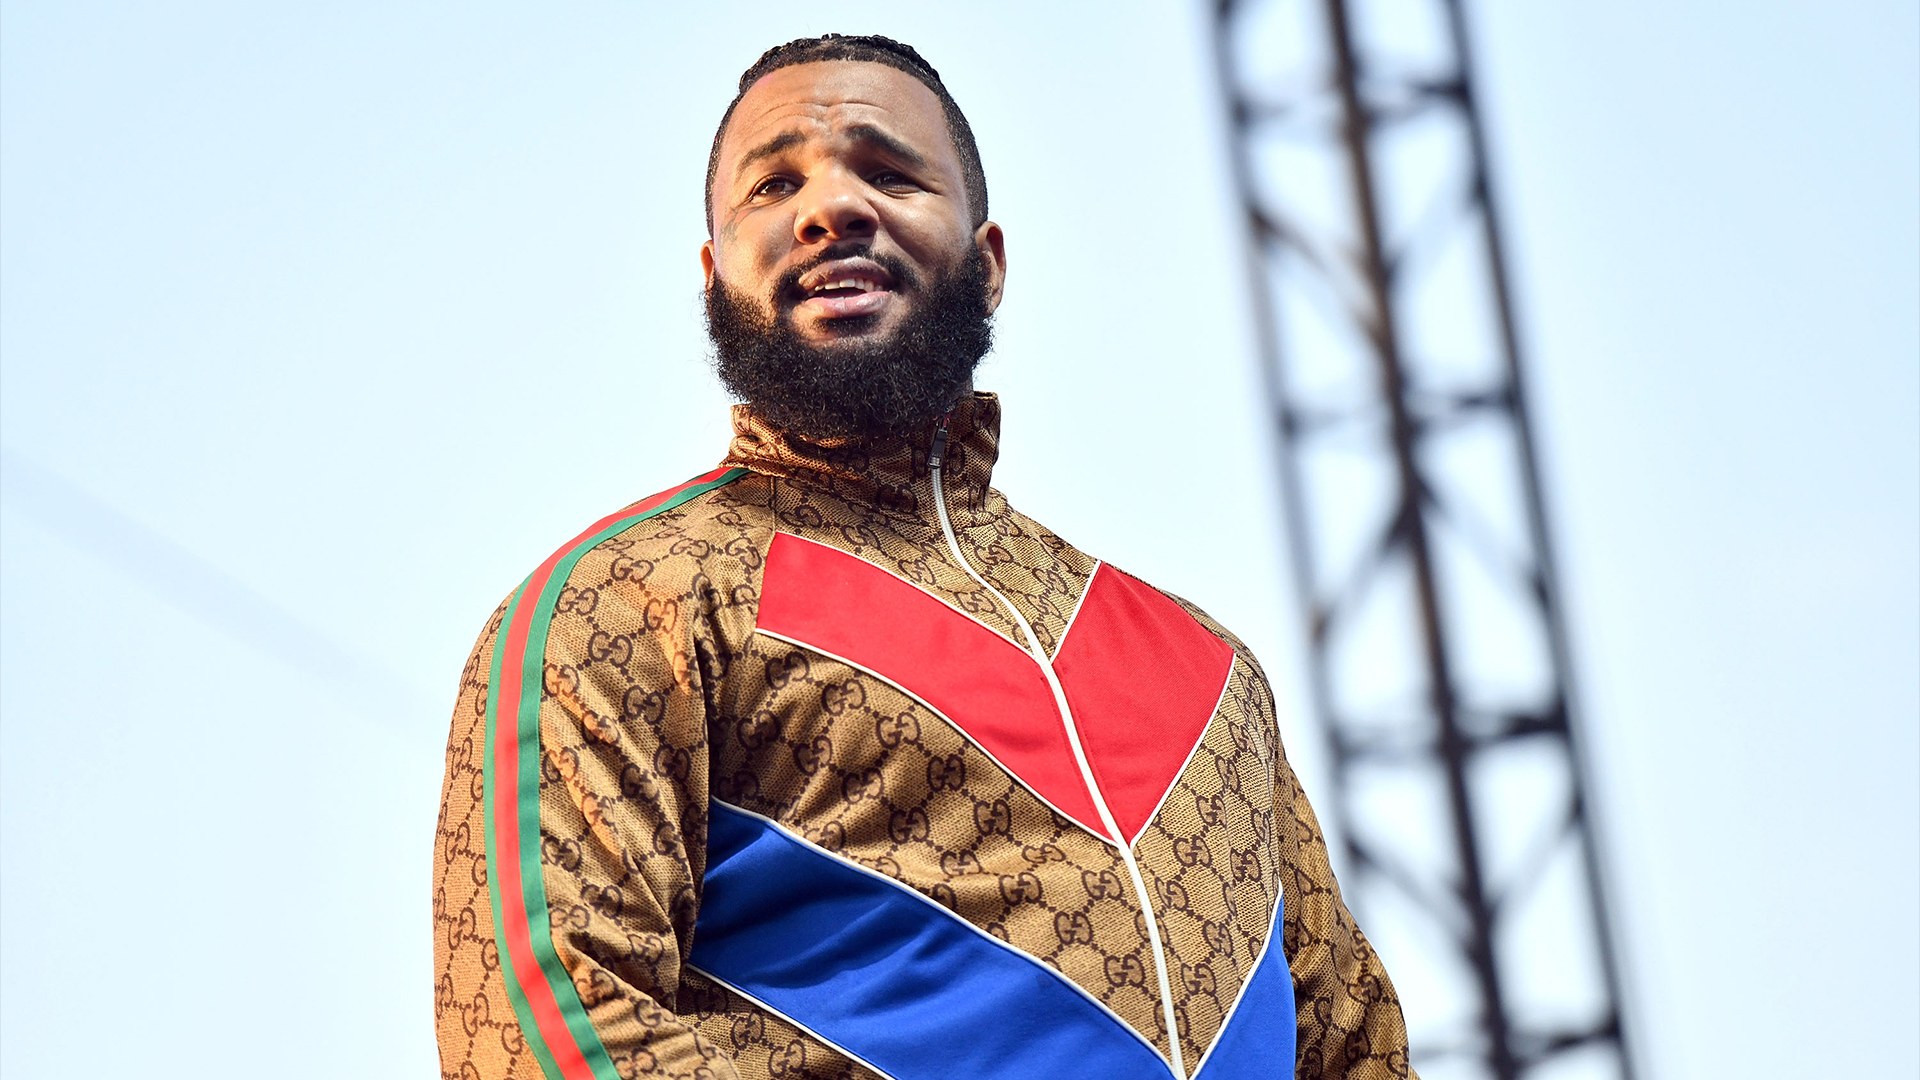 While Admitting His Listed Net Worth Is Too Low, The Game Reveals He Once 'Turned Down Like A $6 -$7 Million Tour'